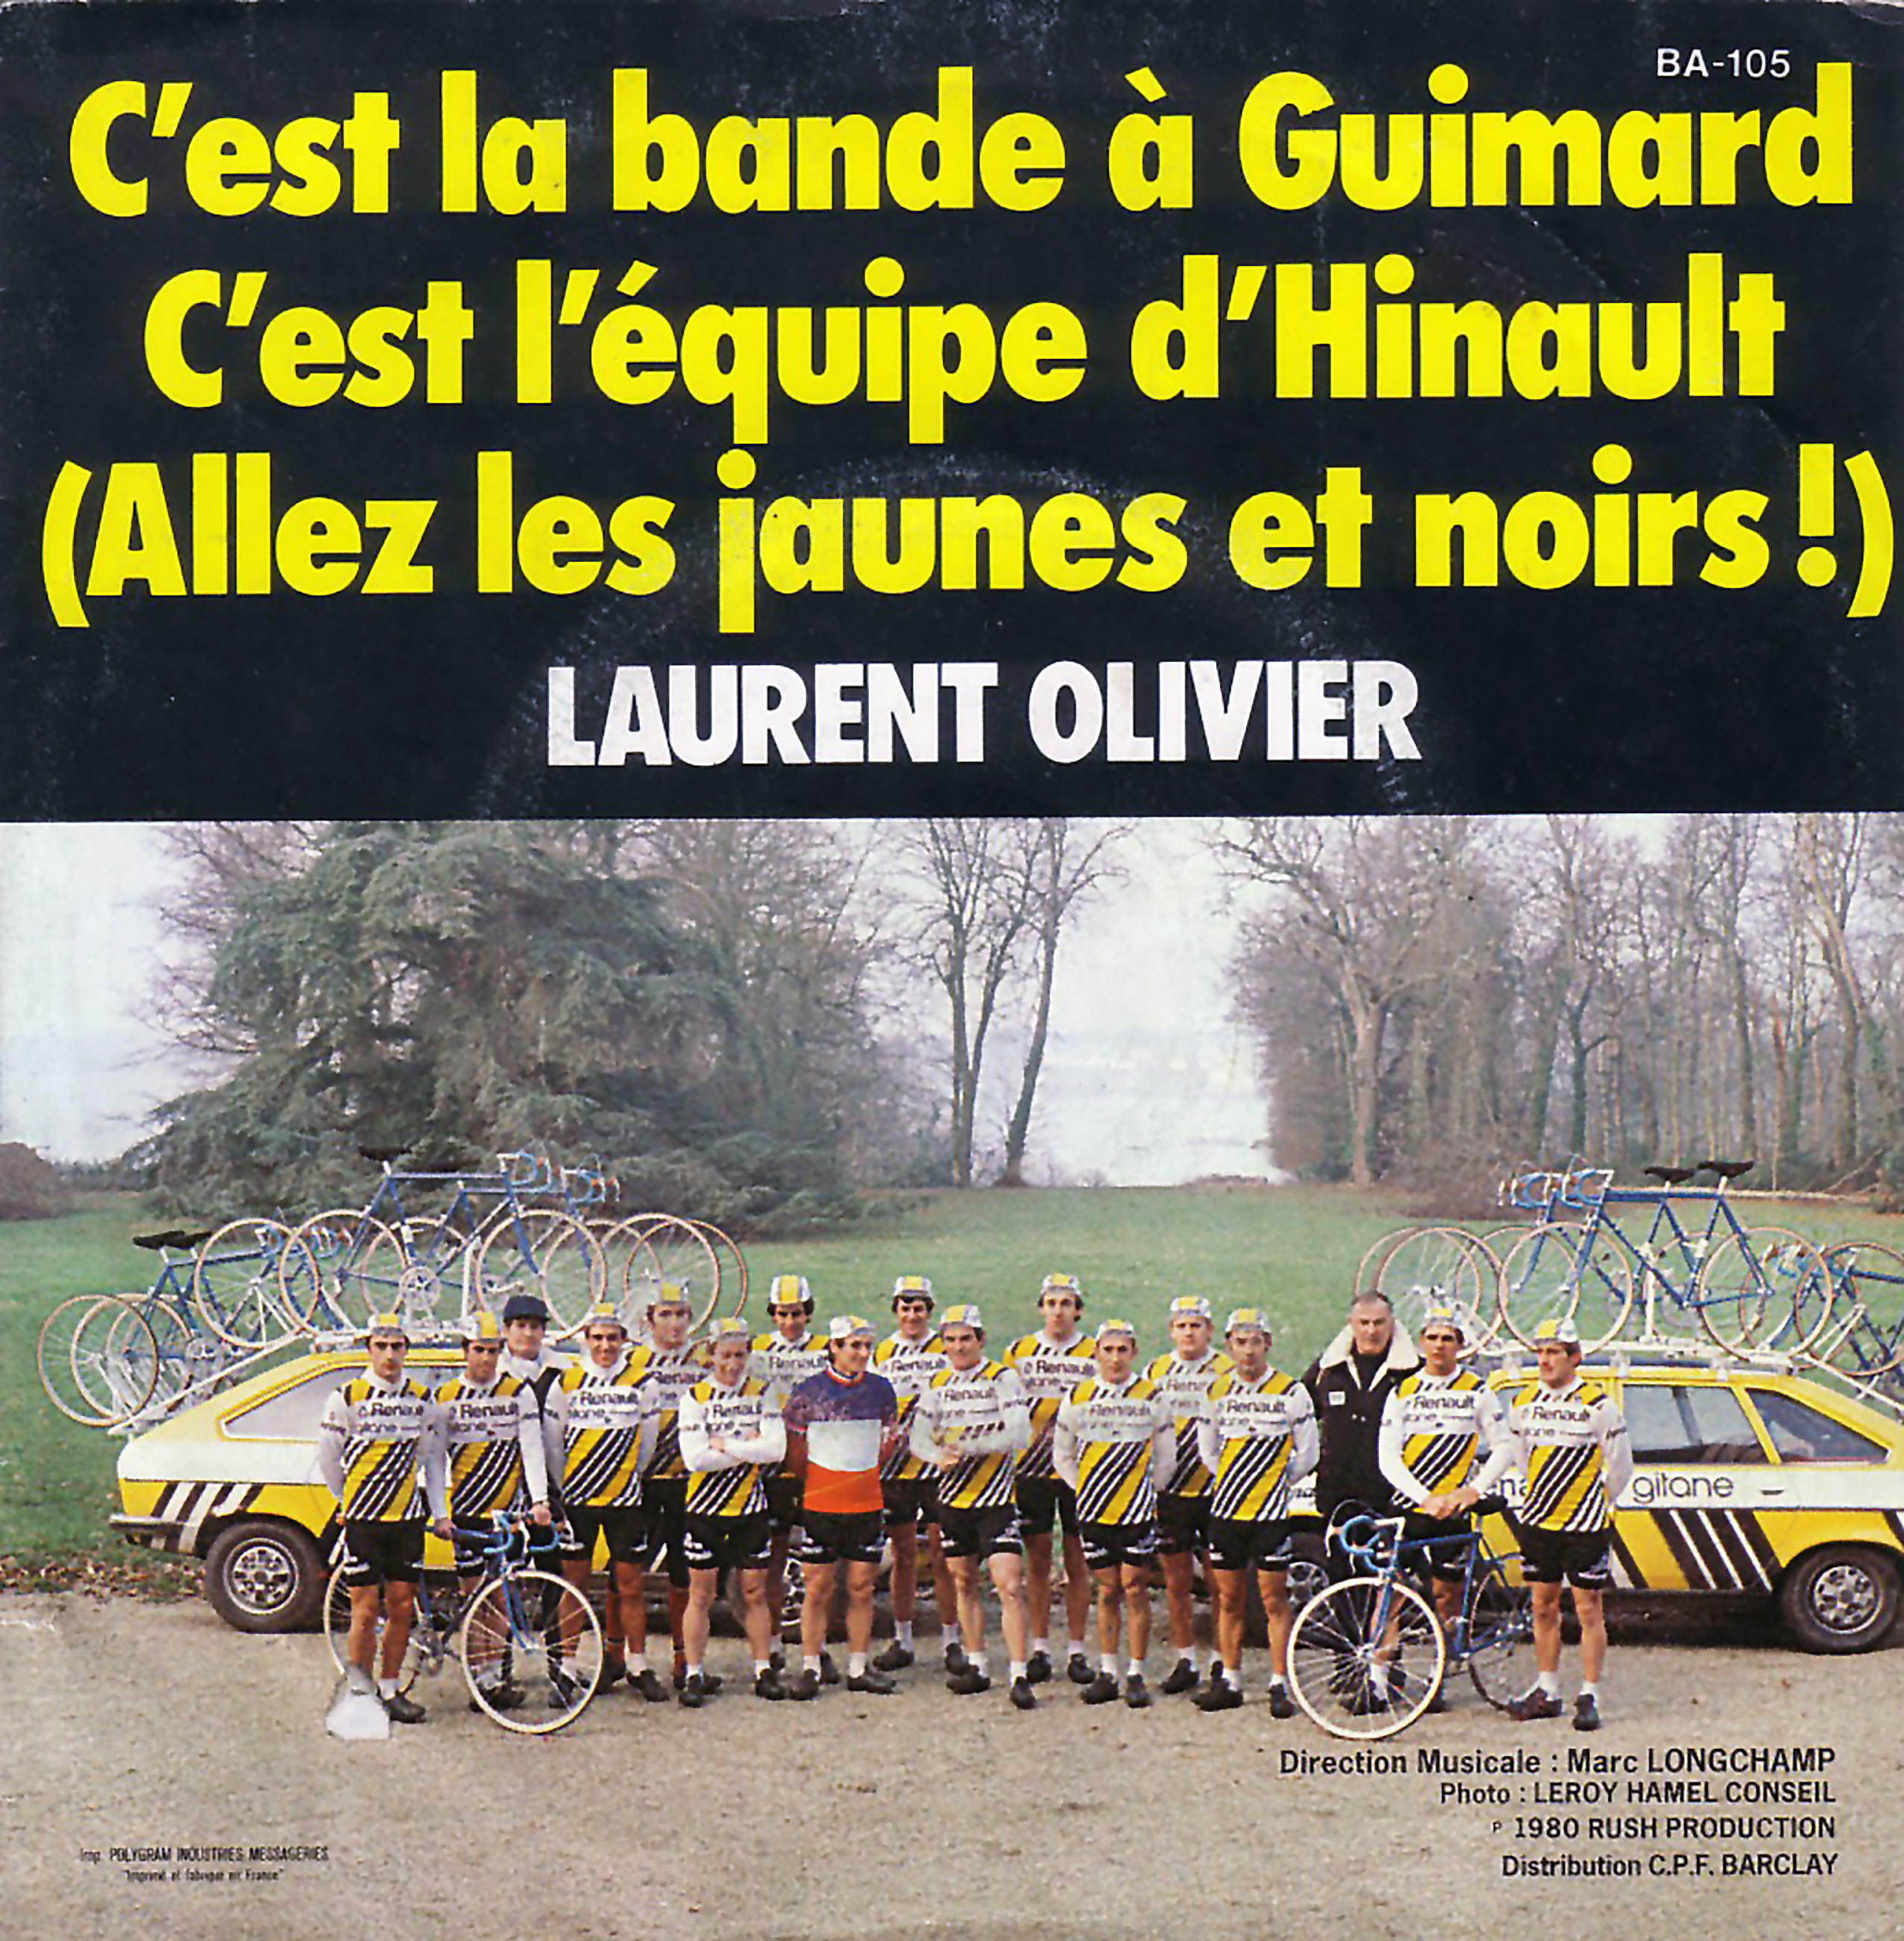 Laurent Olivier Single With the Renault Gitane Cycling Team and Bernard Hinault